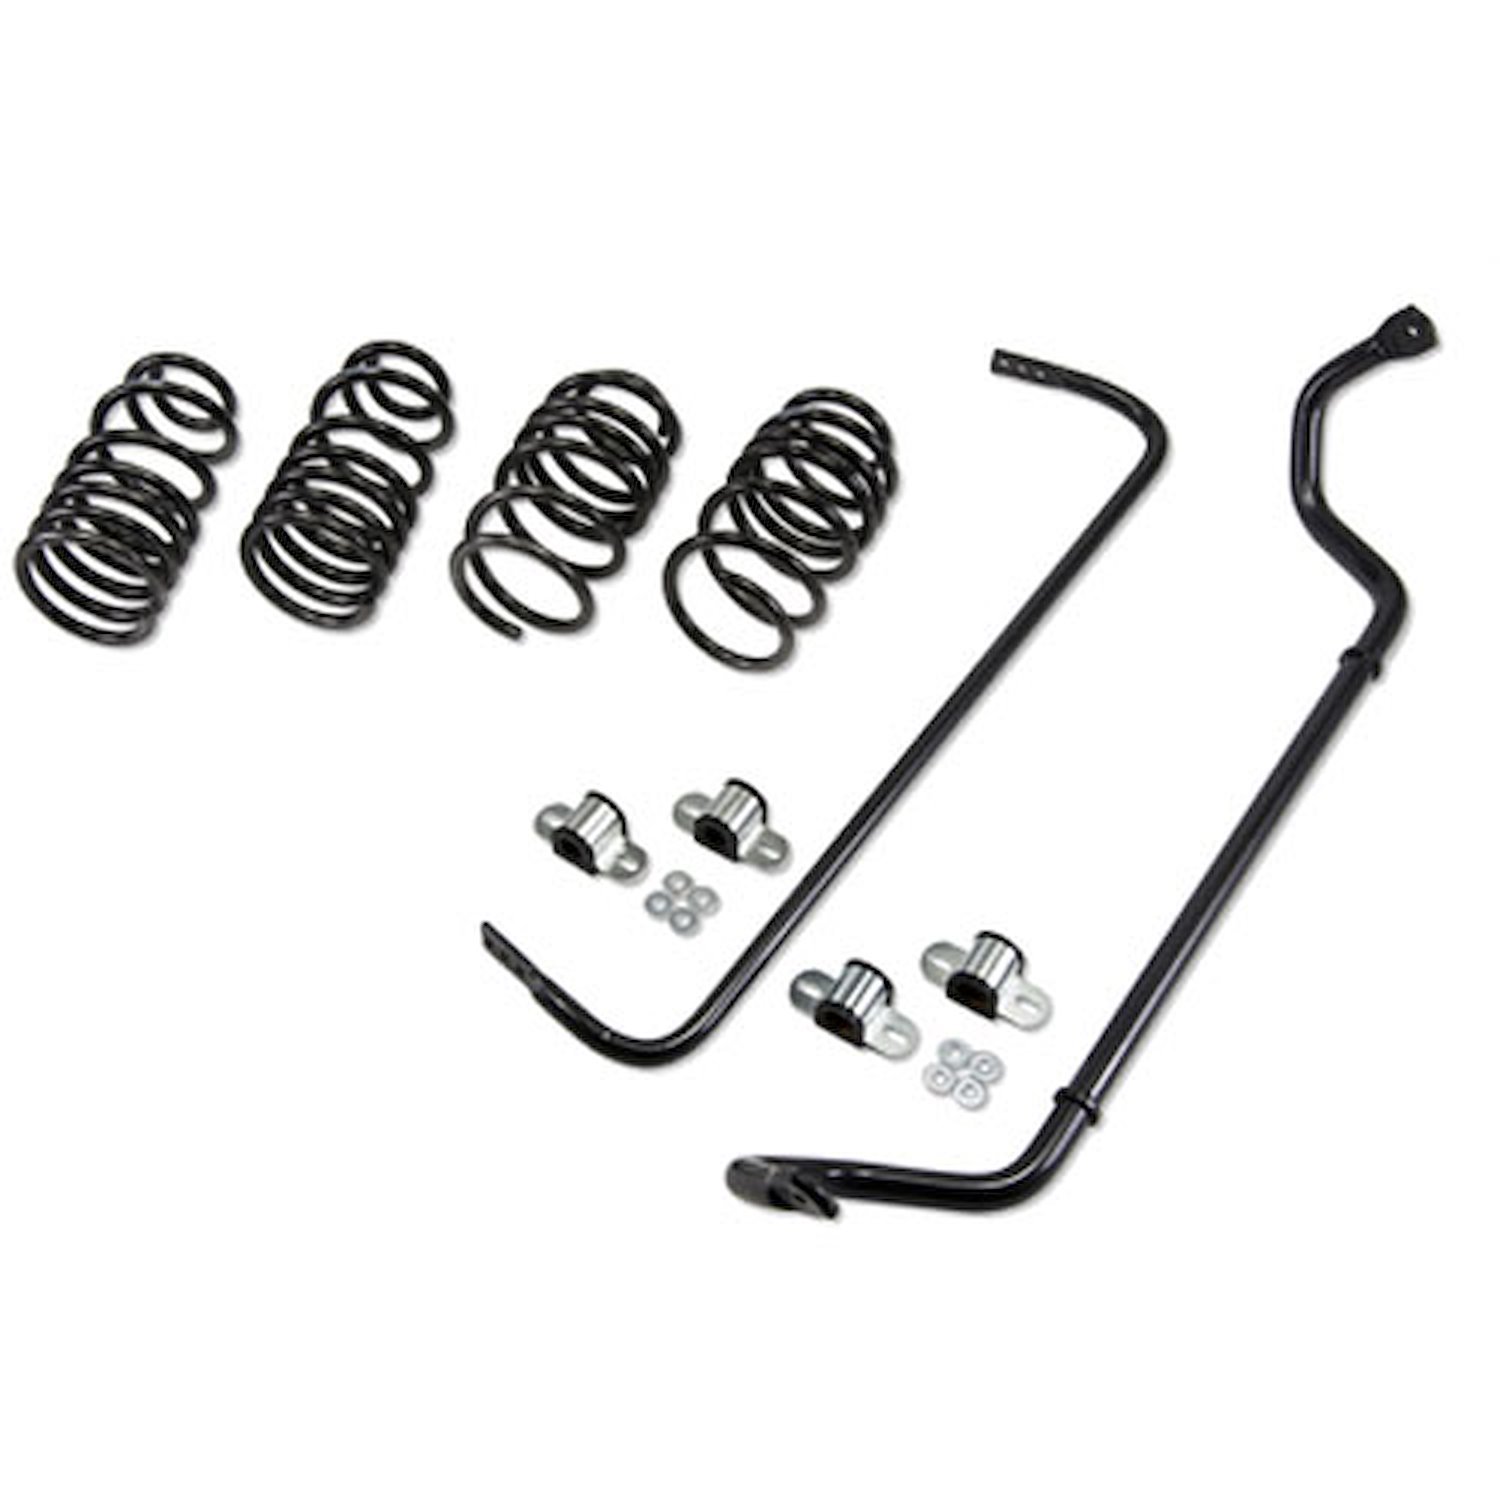 Muscle Car Suspension Kit for 2010-2011 Chevy Camaro